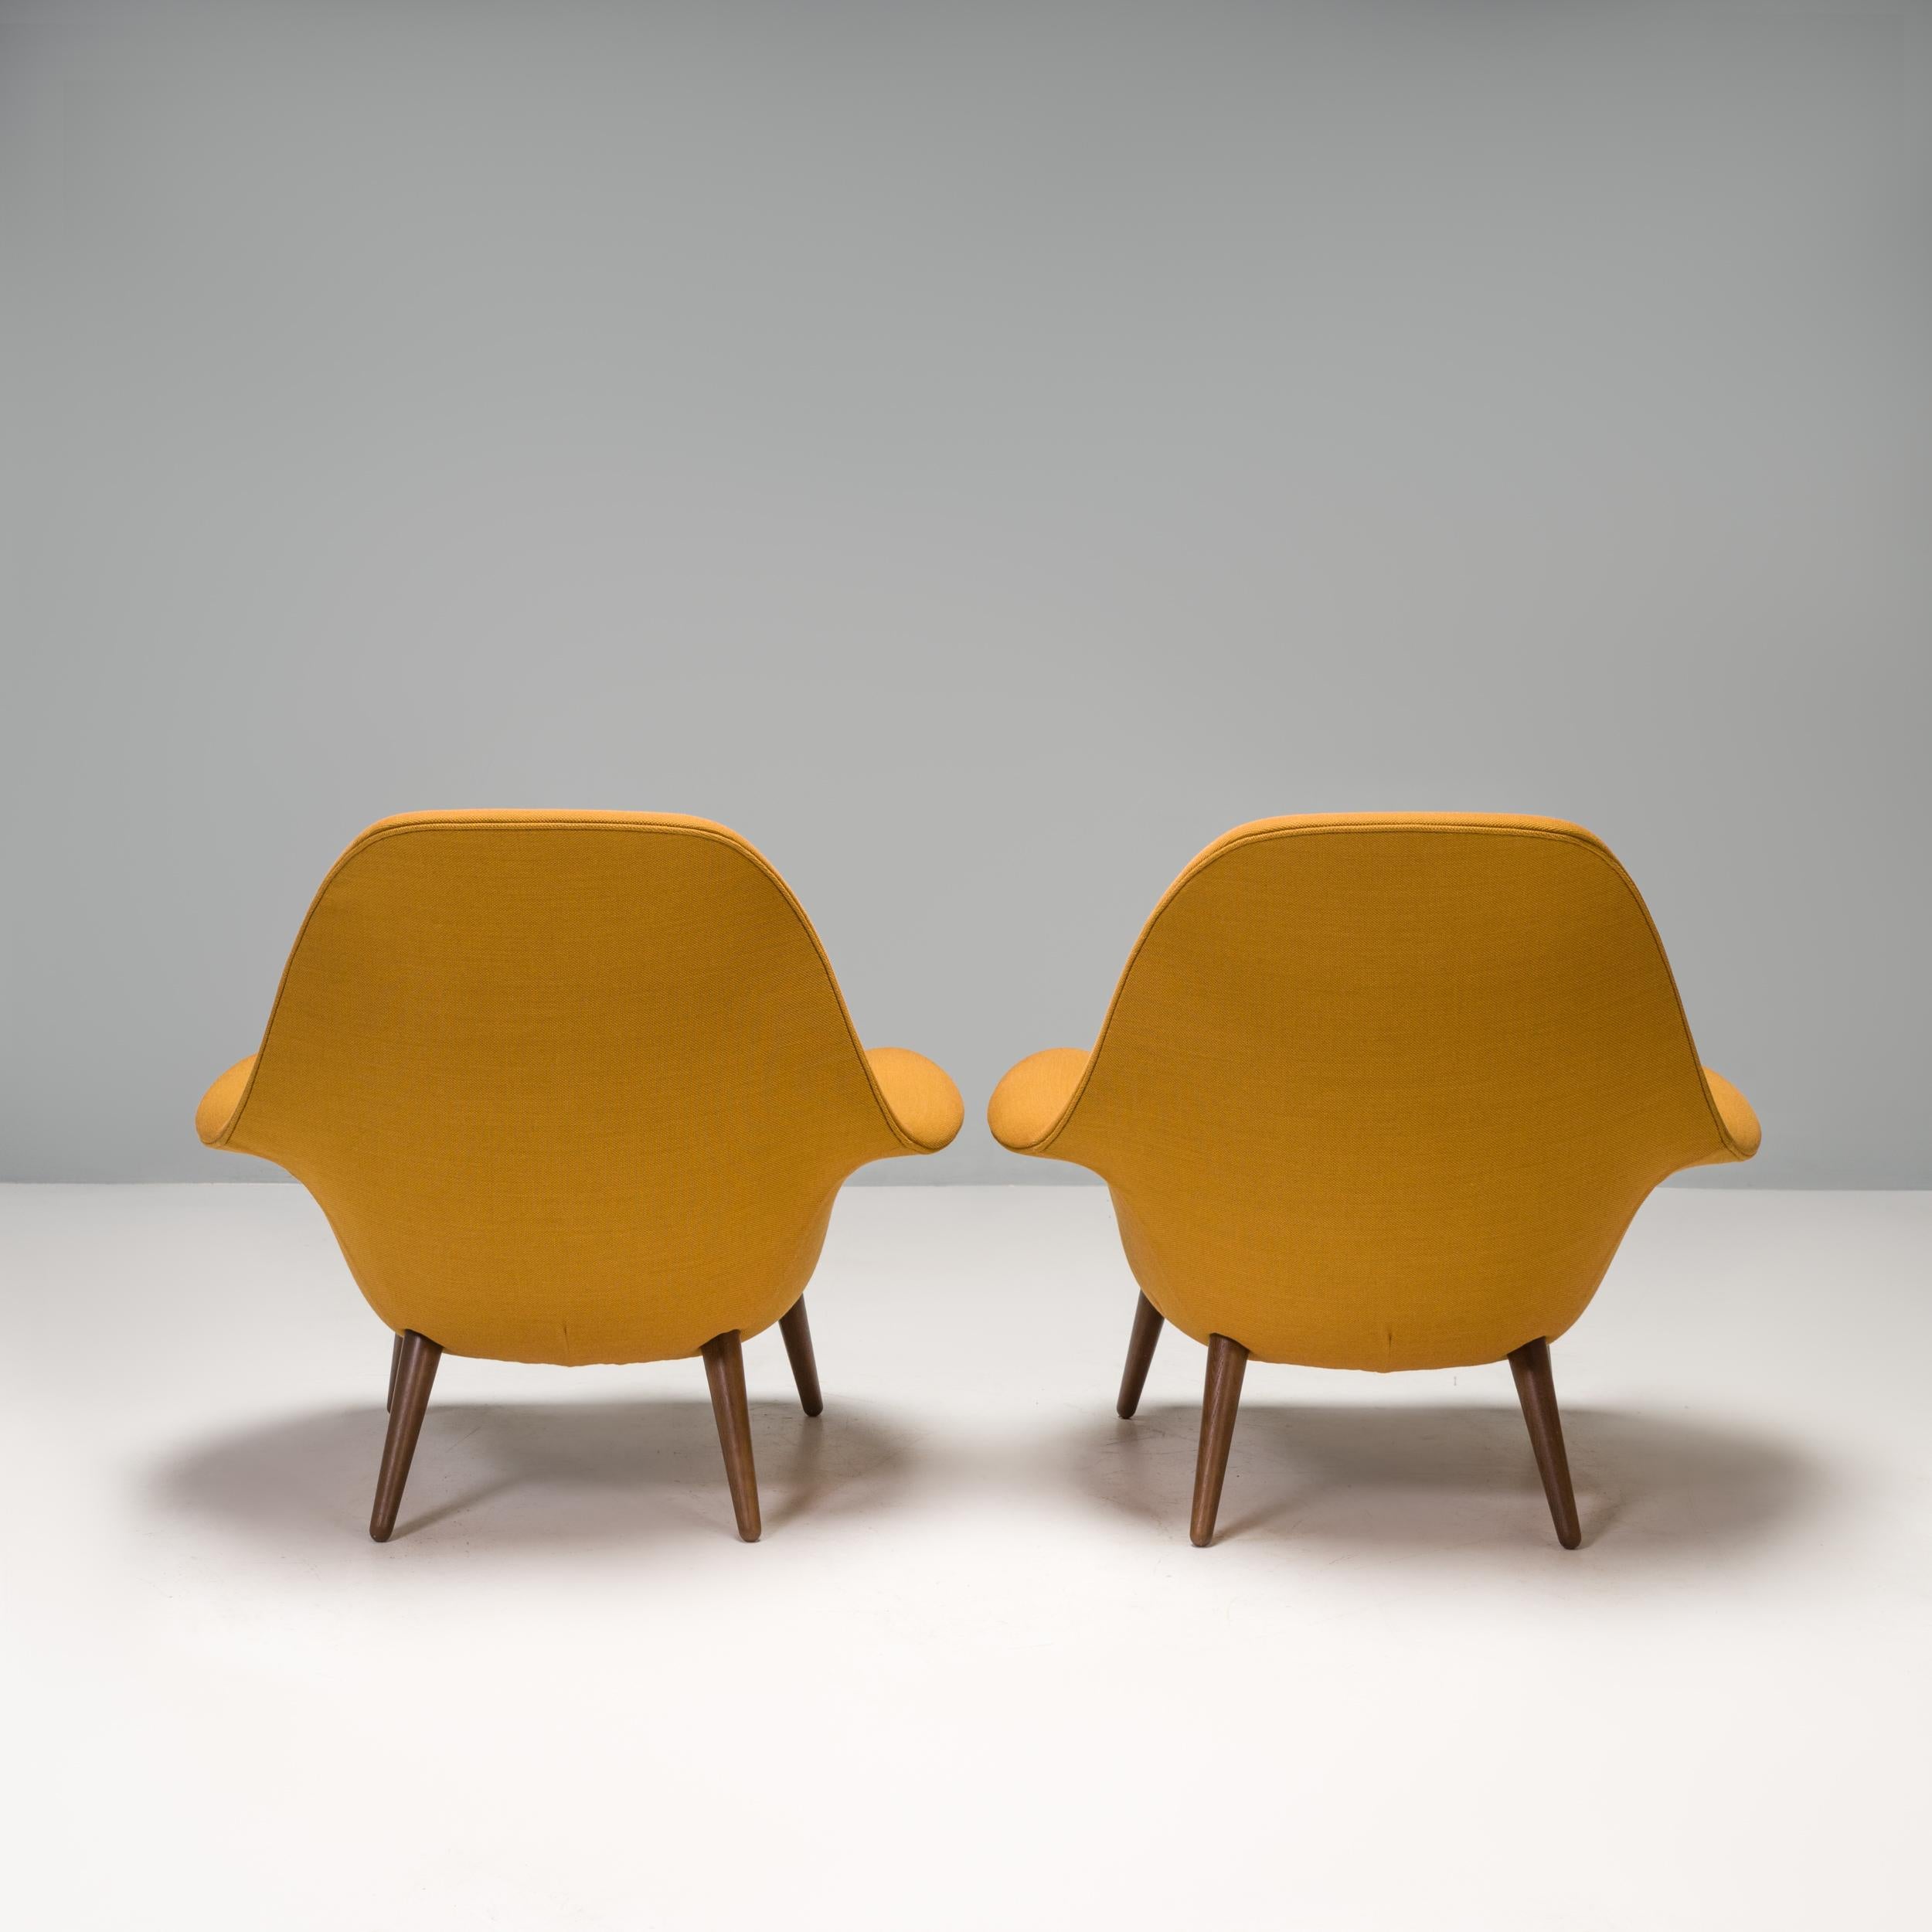 Contemporary Space Copenhagen for Fredericia Mustard Yellow Swoon Lounge Armchairs, Set of 2